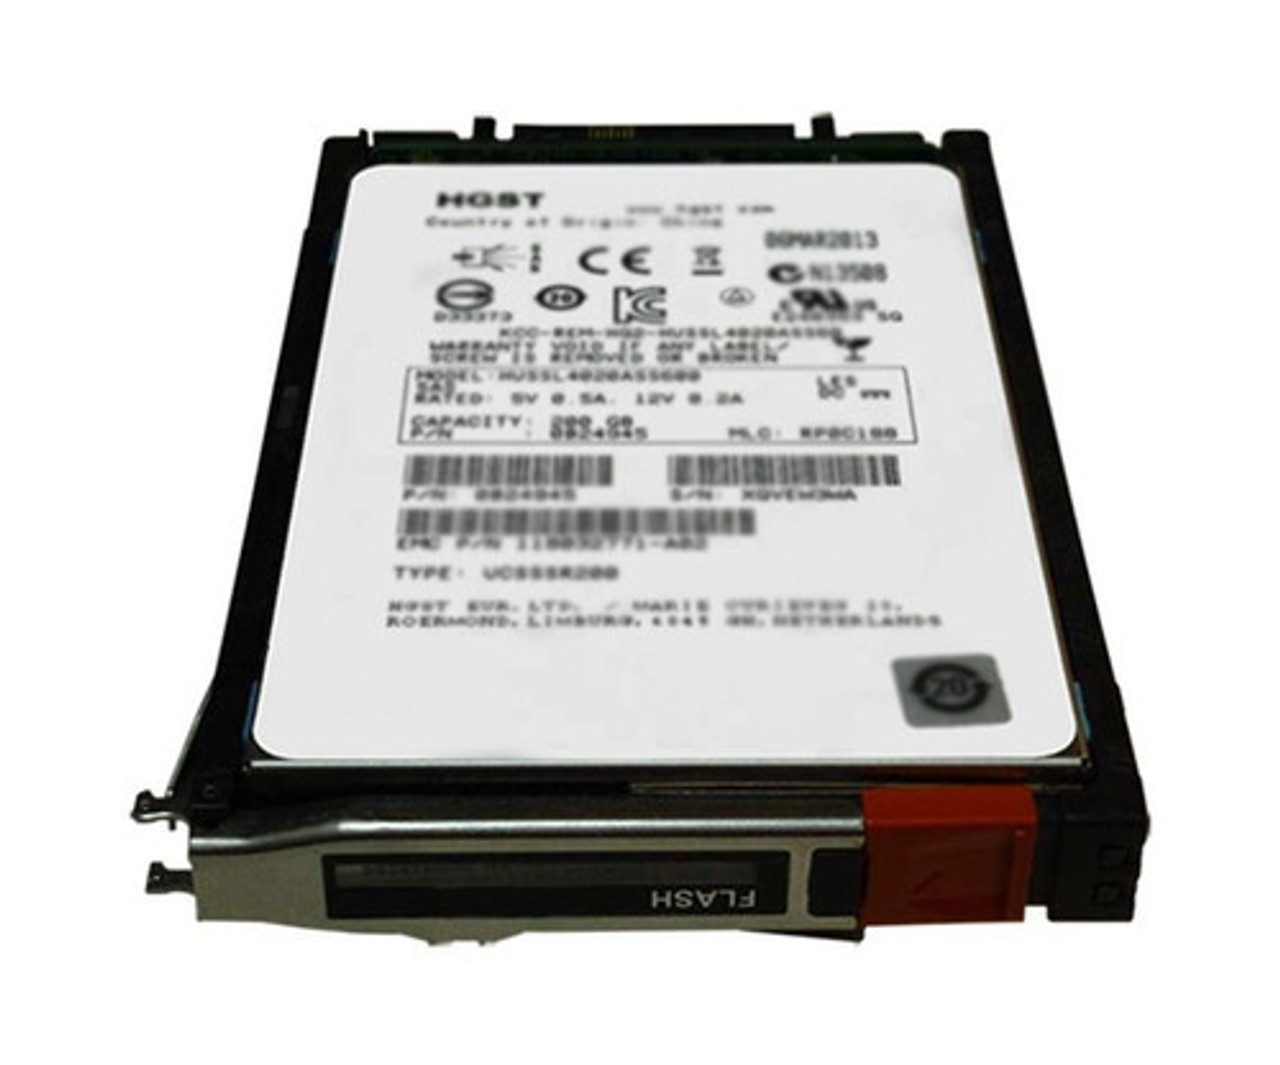 FLV62S6F-100TU | EMC | VNXe 3200 100GB Fast Cache 2.5-inch Internal Solid State Drive (SSD) for 25 x 2.5